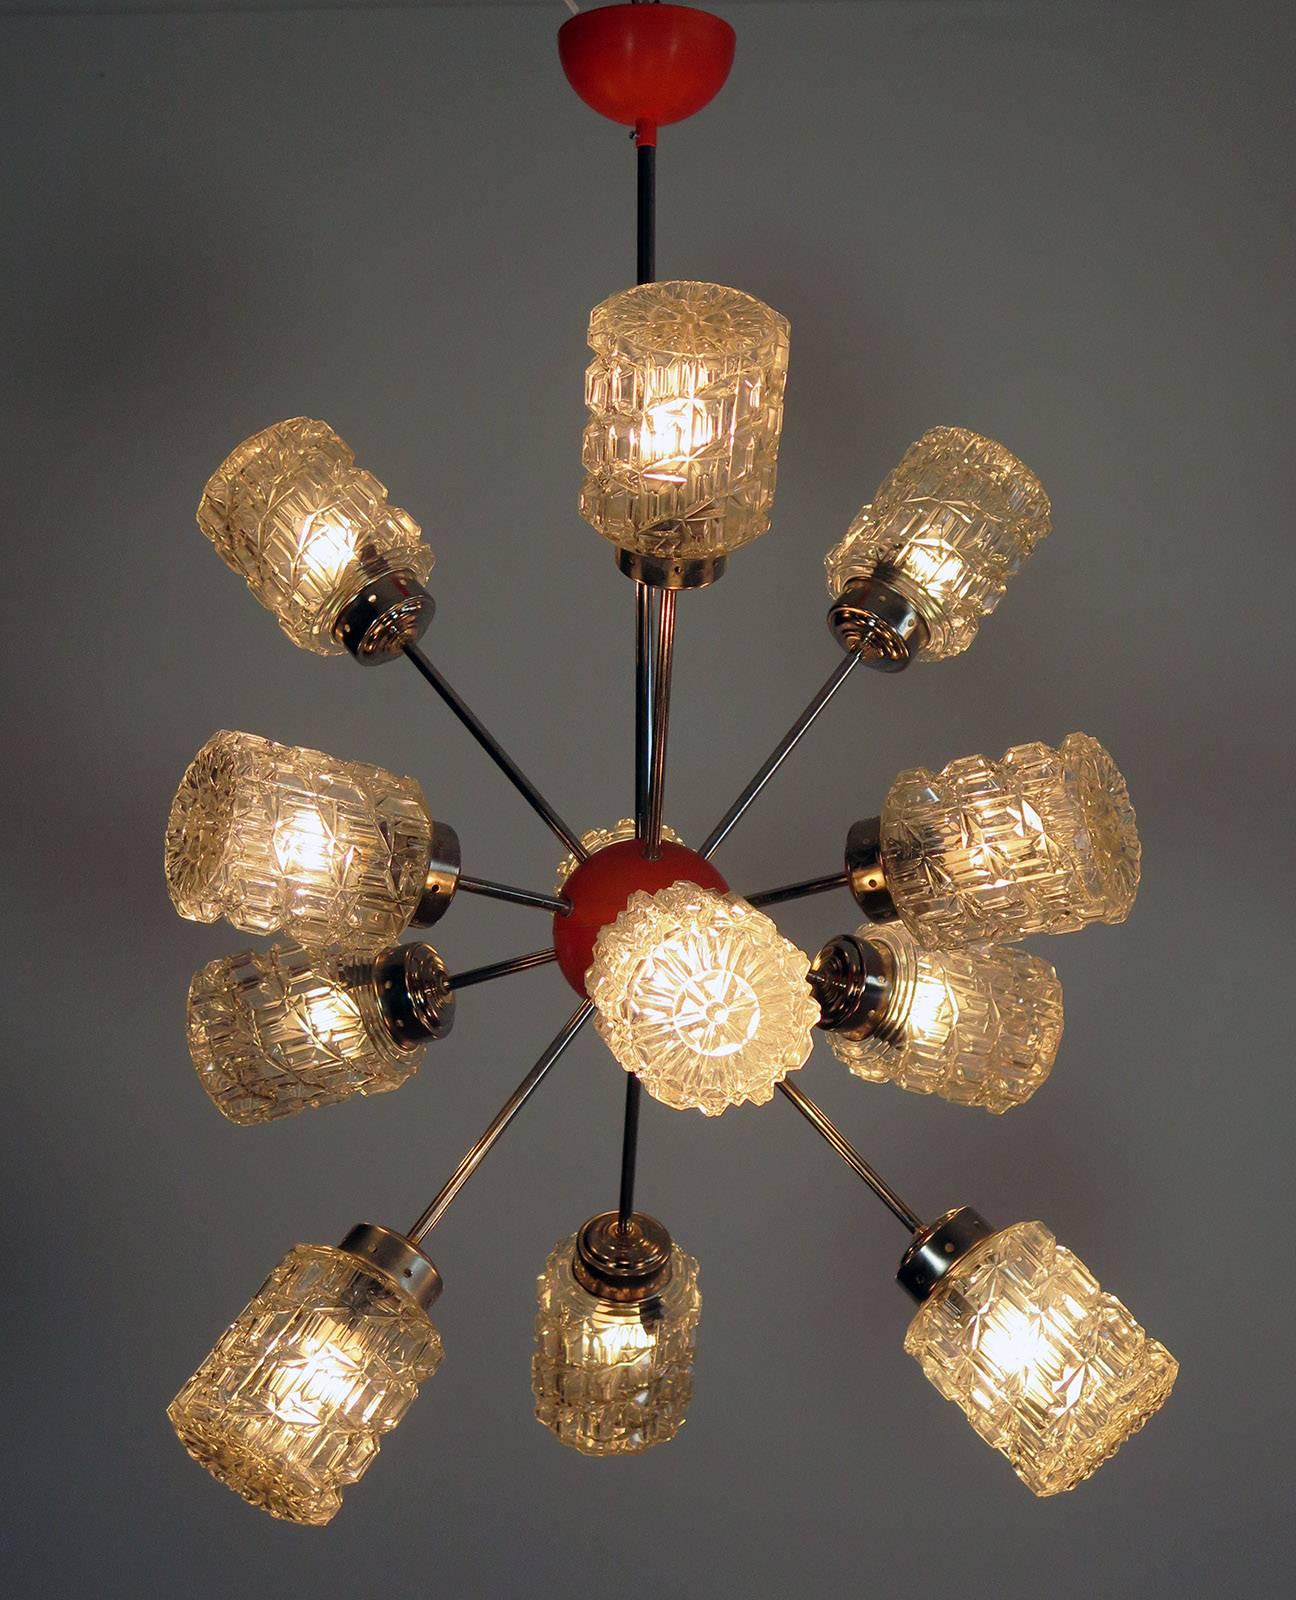 Italian sputnik chandelier made by 12 blown glass mounted on a nickel-plated metal frame with a central sphere painted in a classic '70 orange color. It's main feature is the external ashlar shaped diamond tips which creates special light effects.